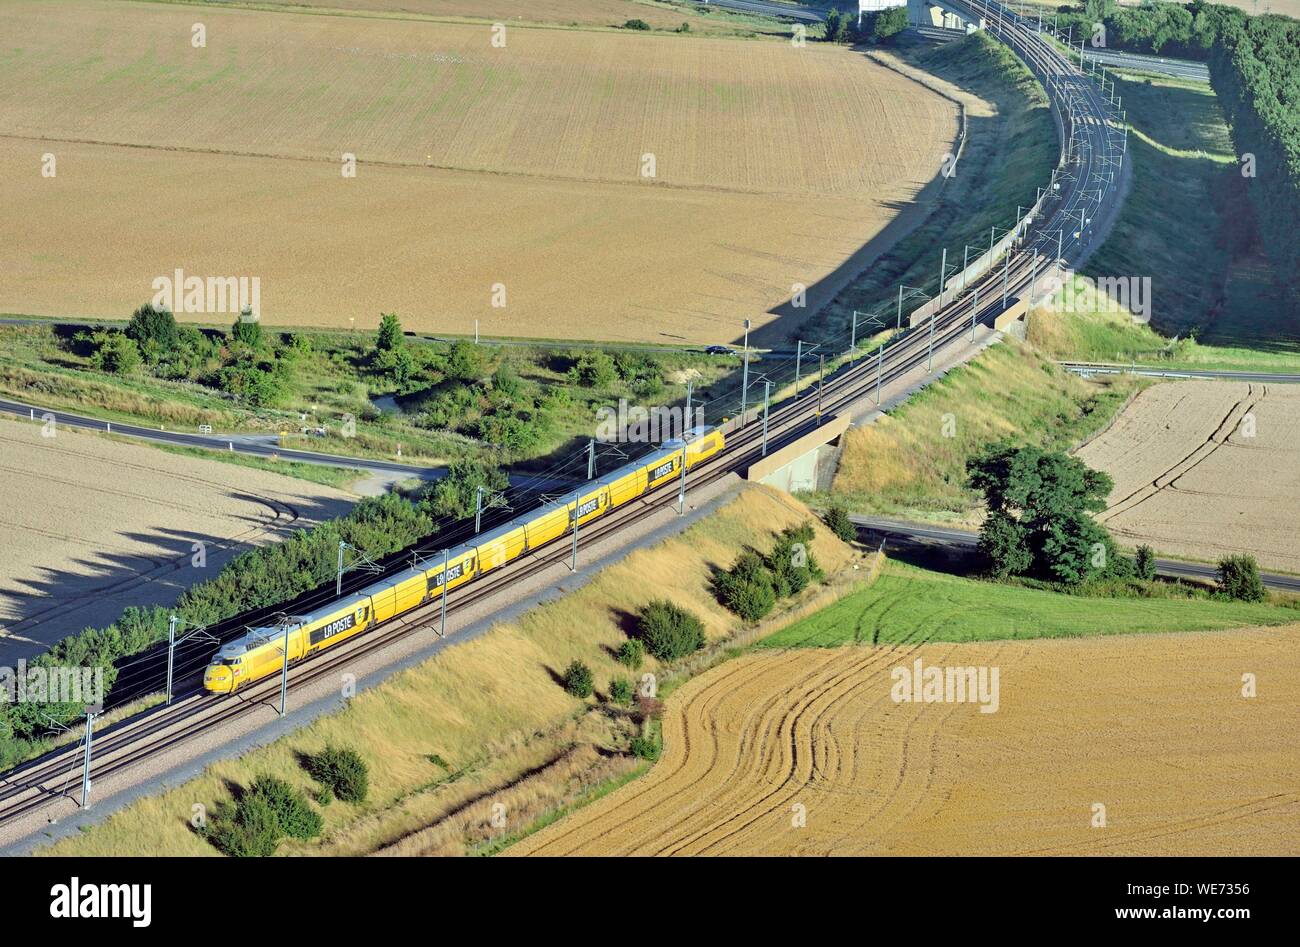 France, Seine et Marne, postal service, mail trains (aerial view) Stock Photo